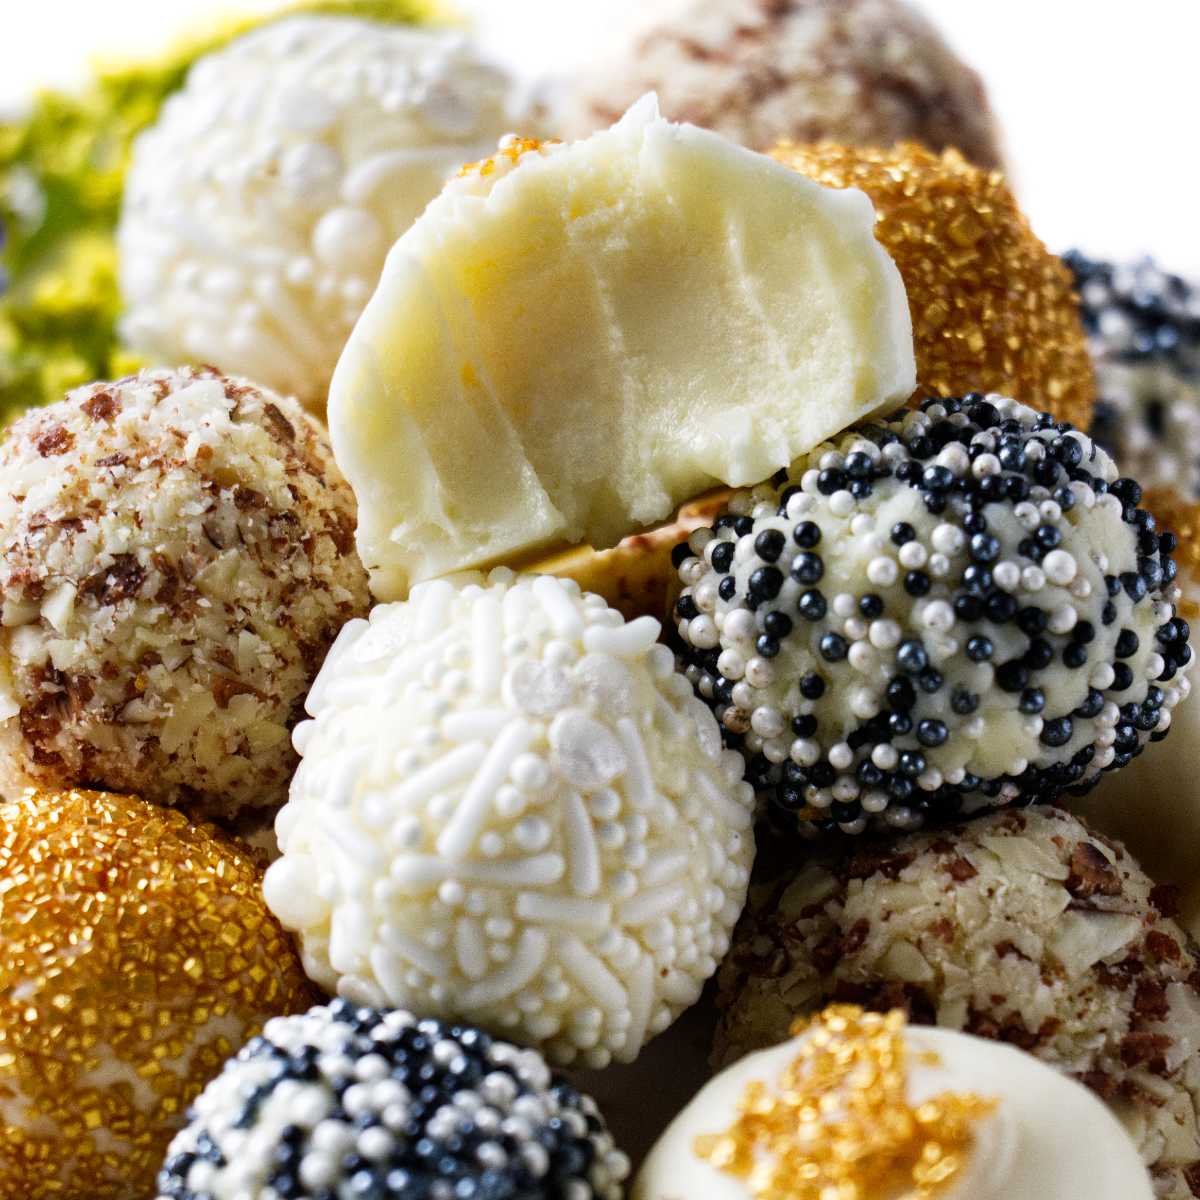 White chocolate truffles coated in chocolate and sprinkles.